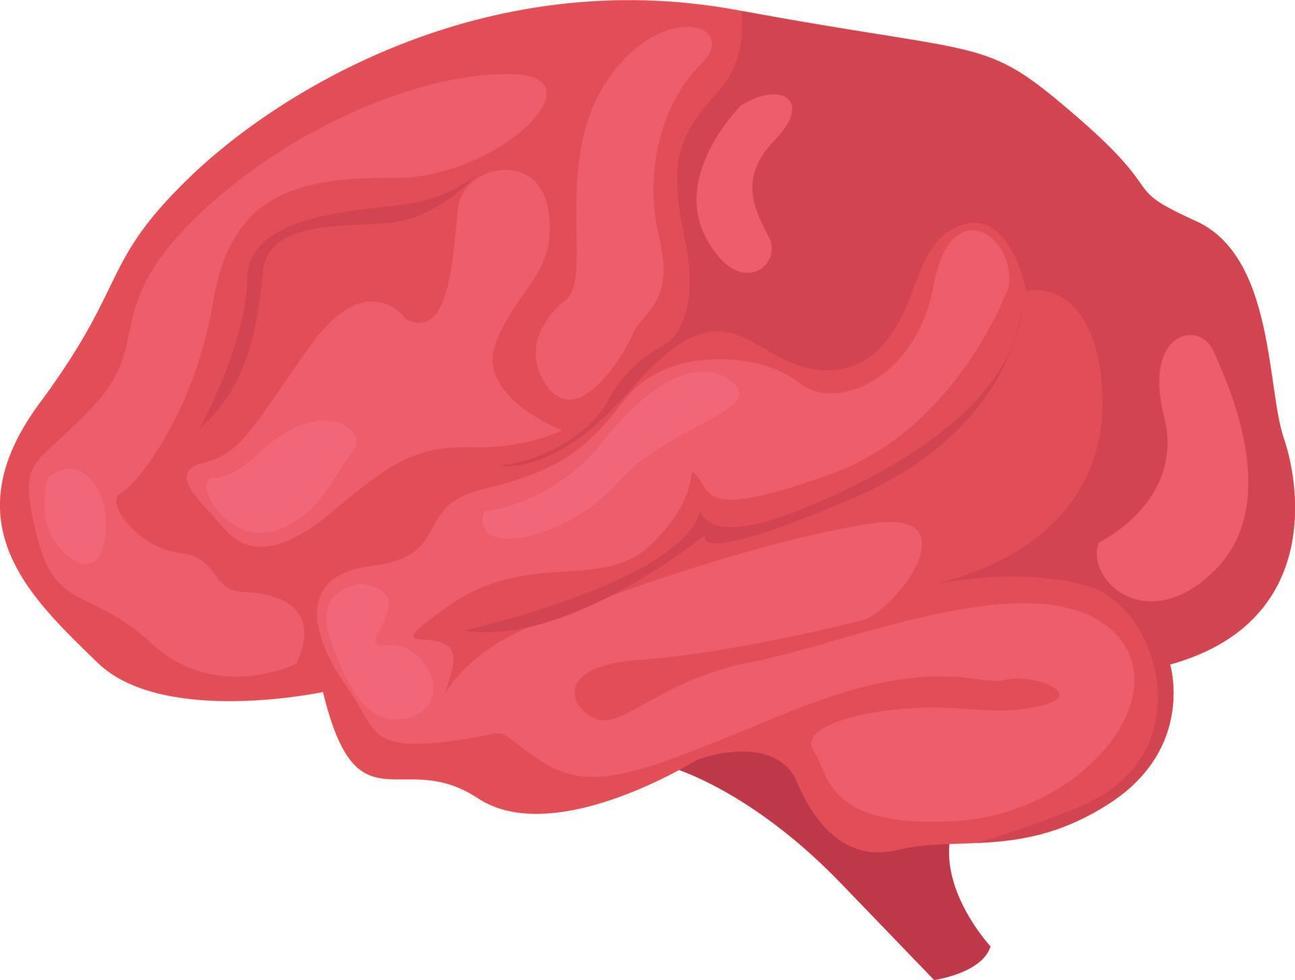 Human brain, illustration, vector on a white background.